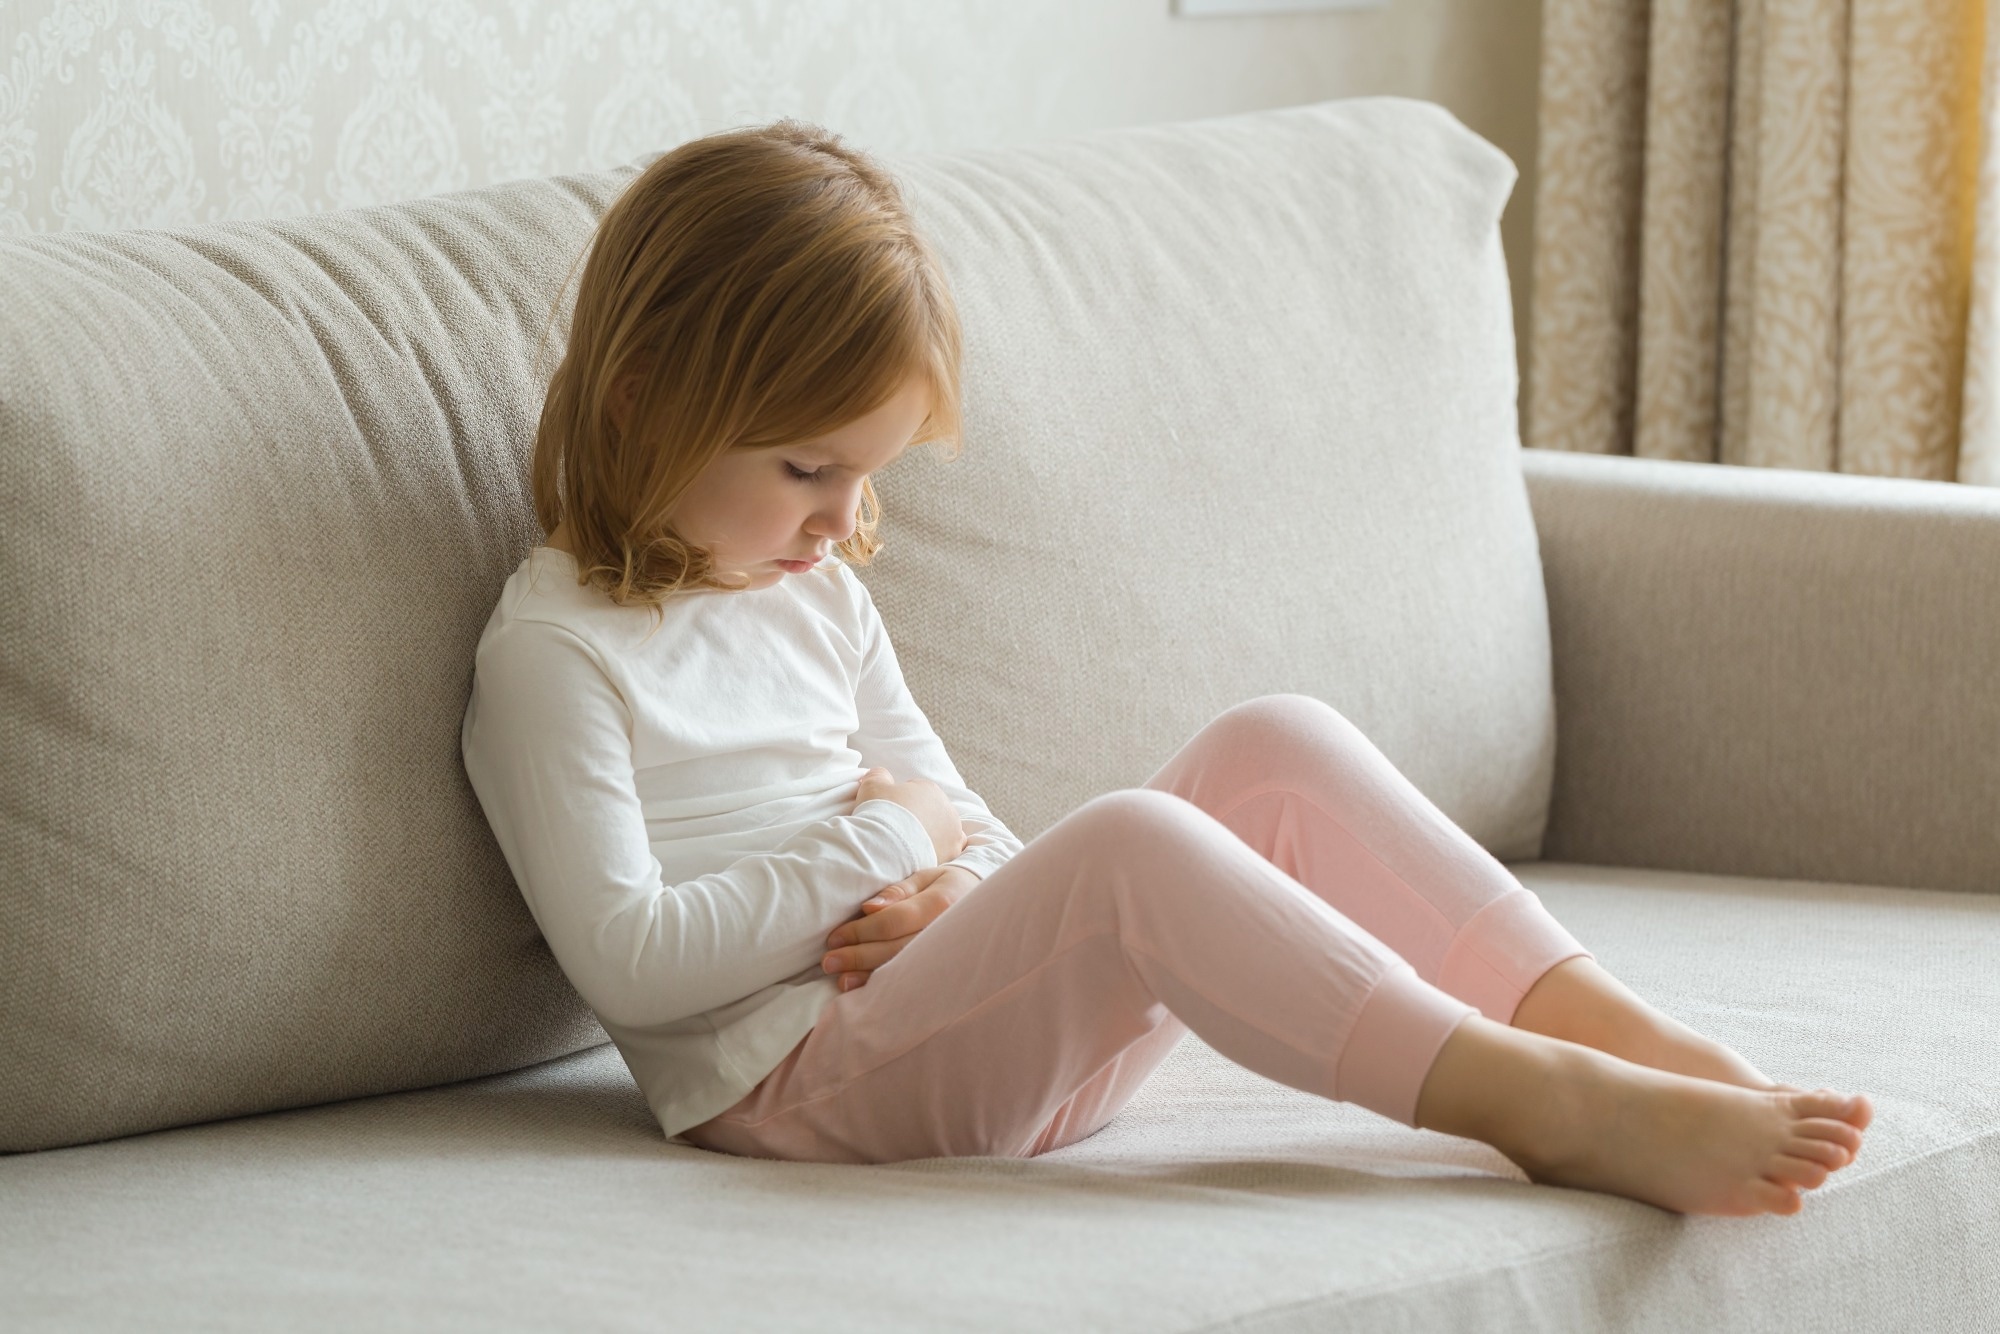 Study: The Use of Fibers, Herbal Medicines and Spices in Children with Irritable Bowel Syndrome: A Narrative Review. Image Credit: FotoDuets/Shutterstock.com